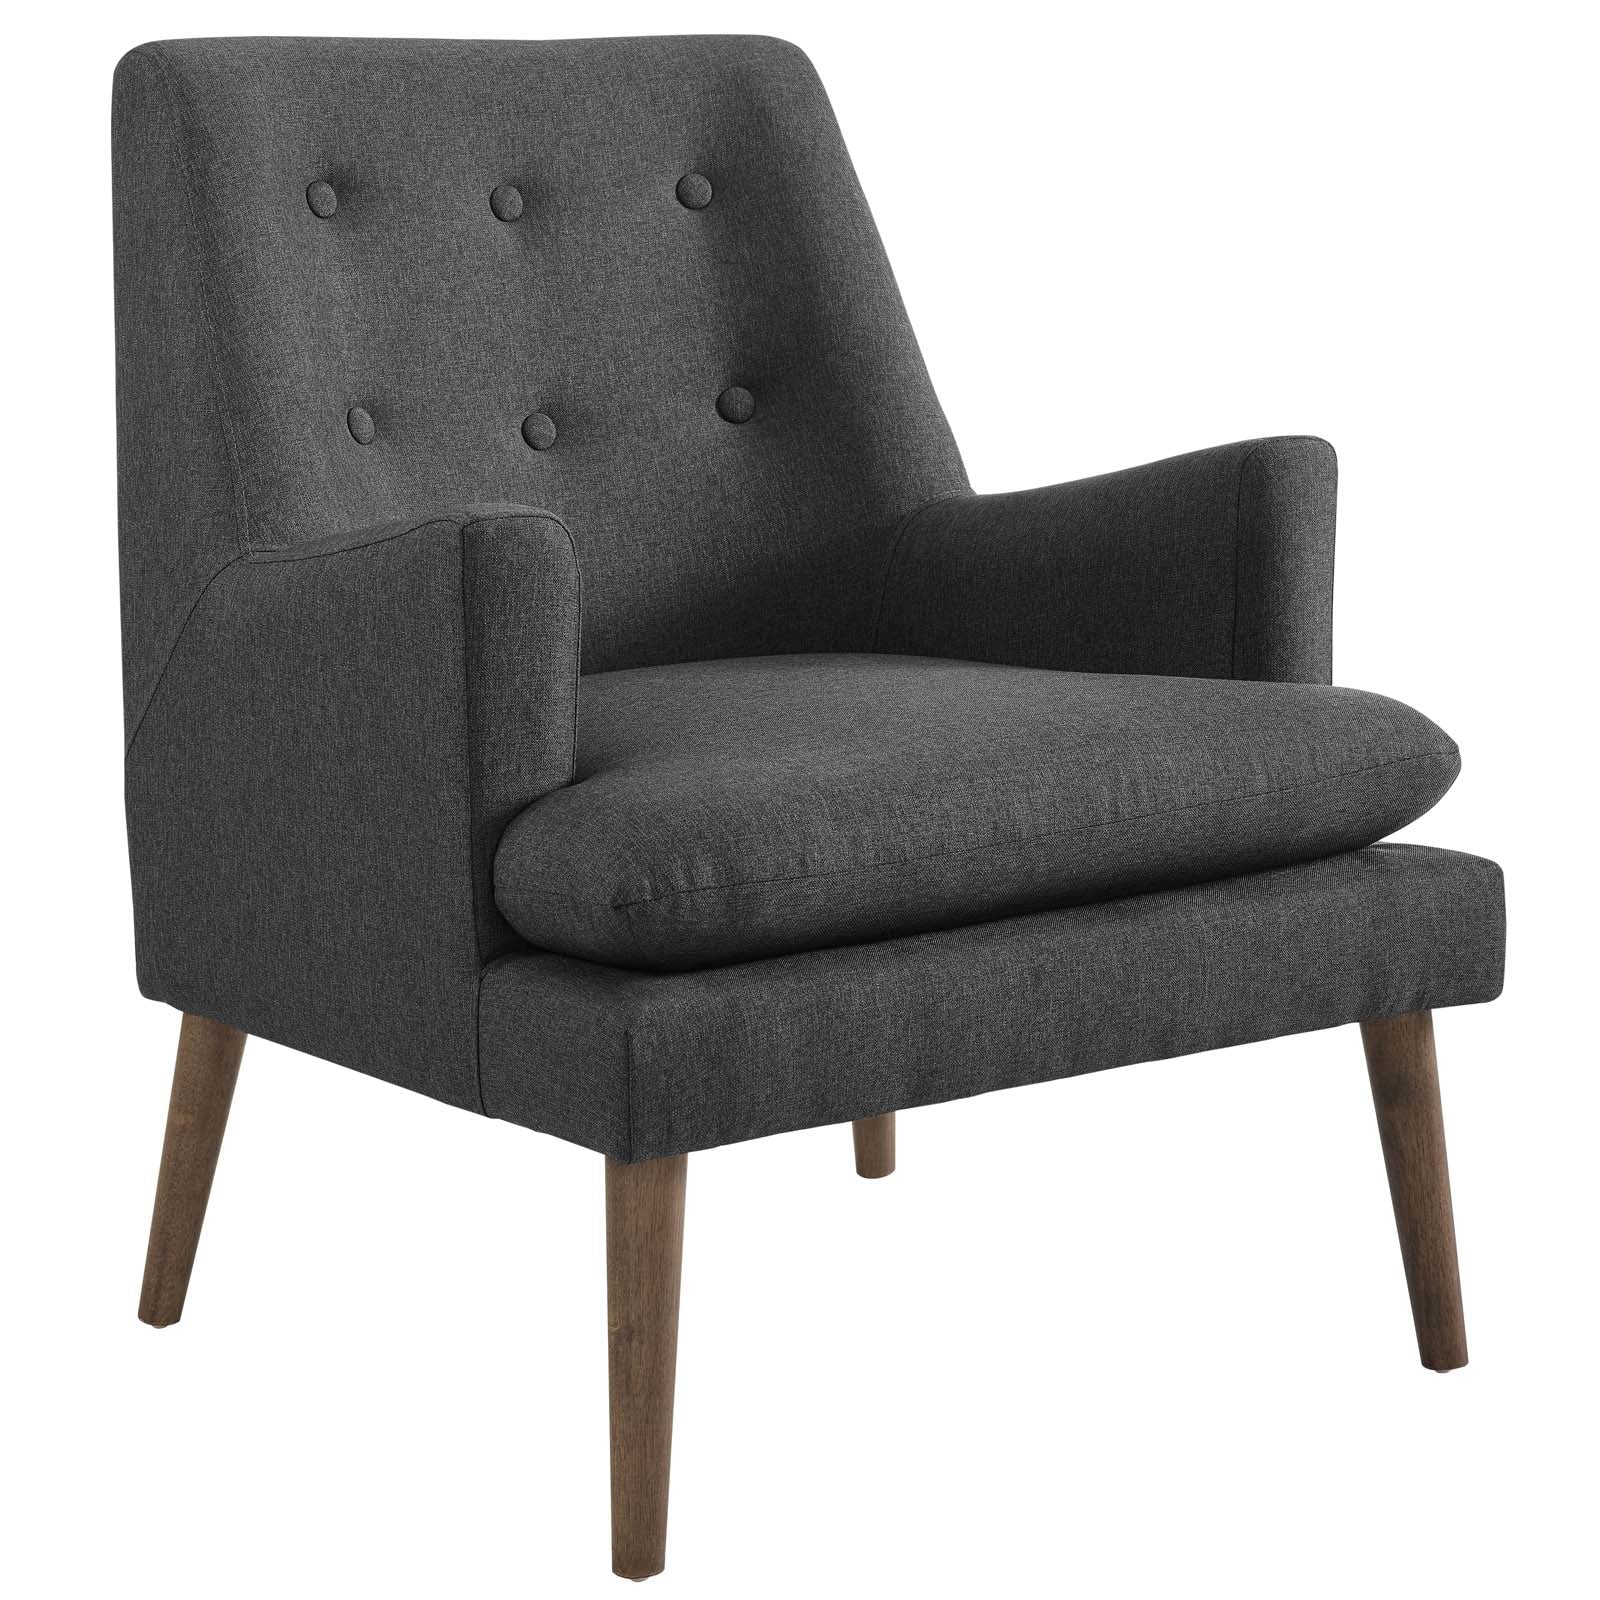 Modway Accent Chairs - Leisure Upholstered Lounge Chair Gray